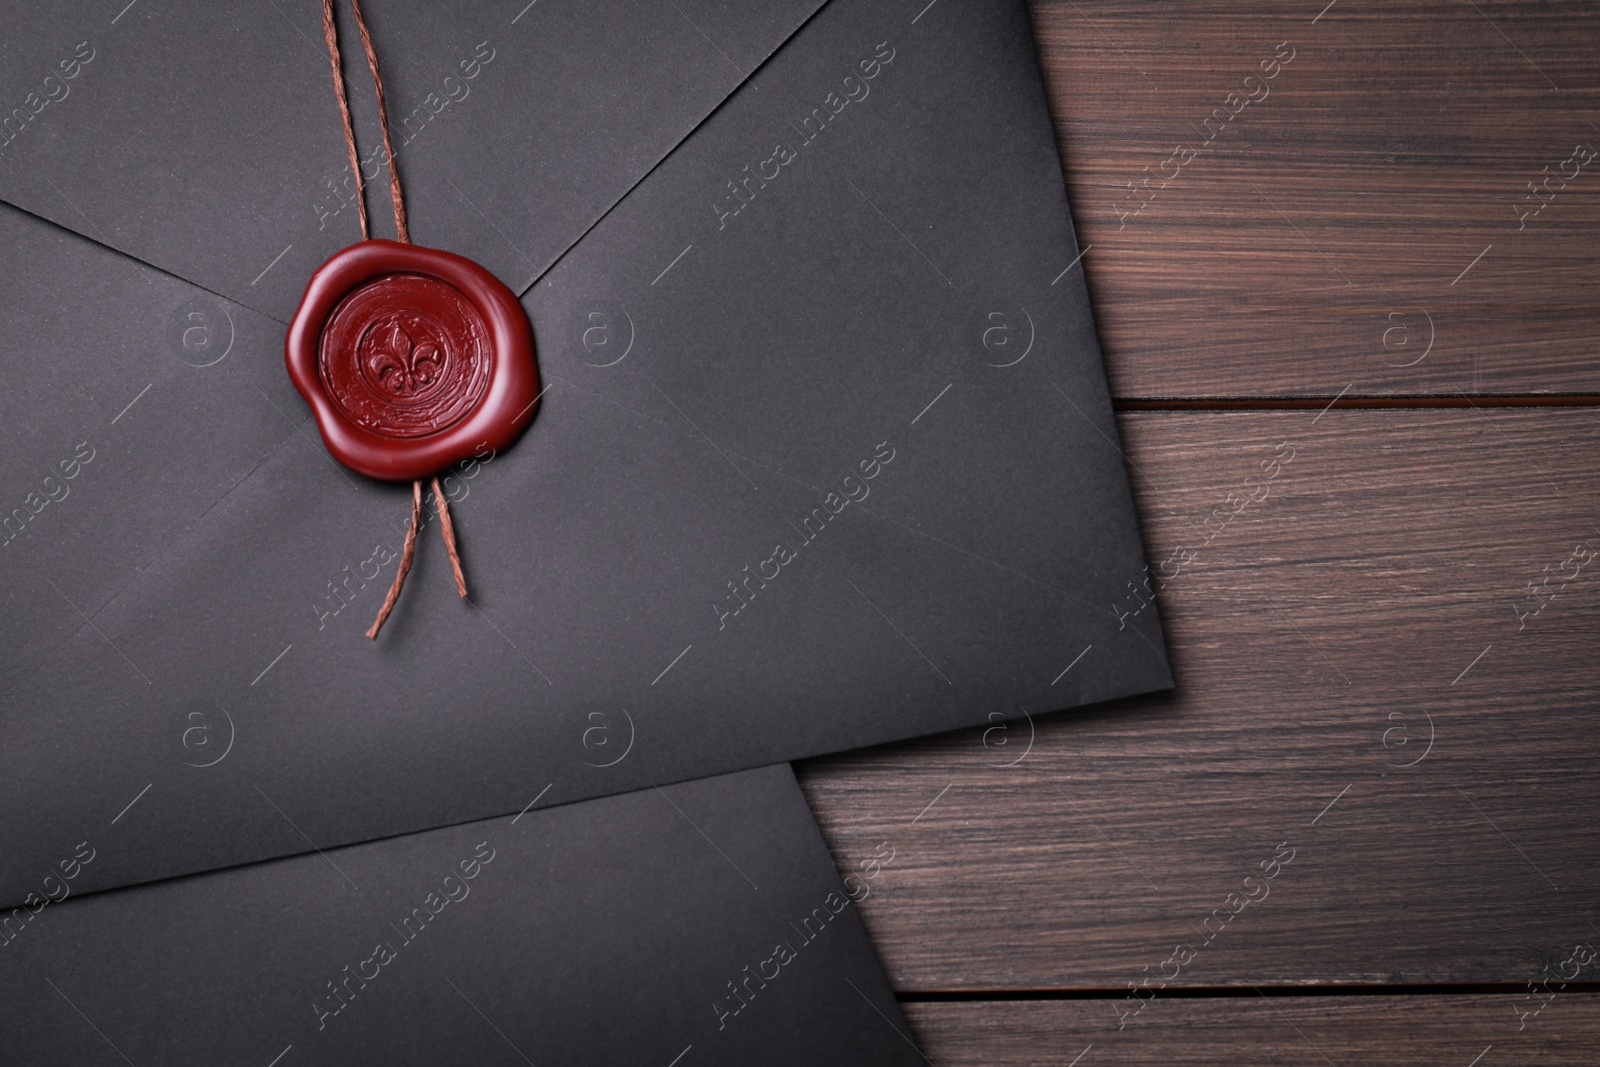 Photo of Black envelopes with wax seal on wooden background, flat lay